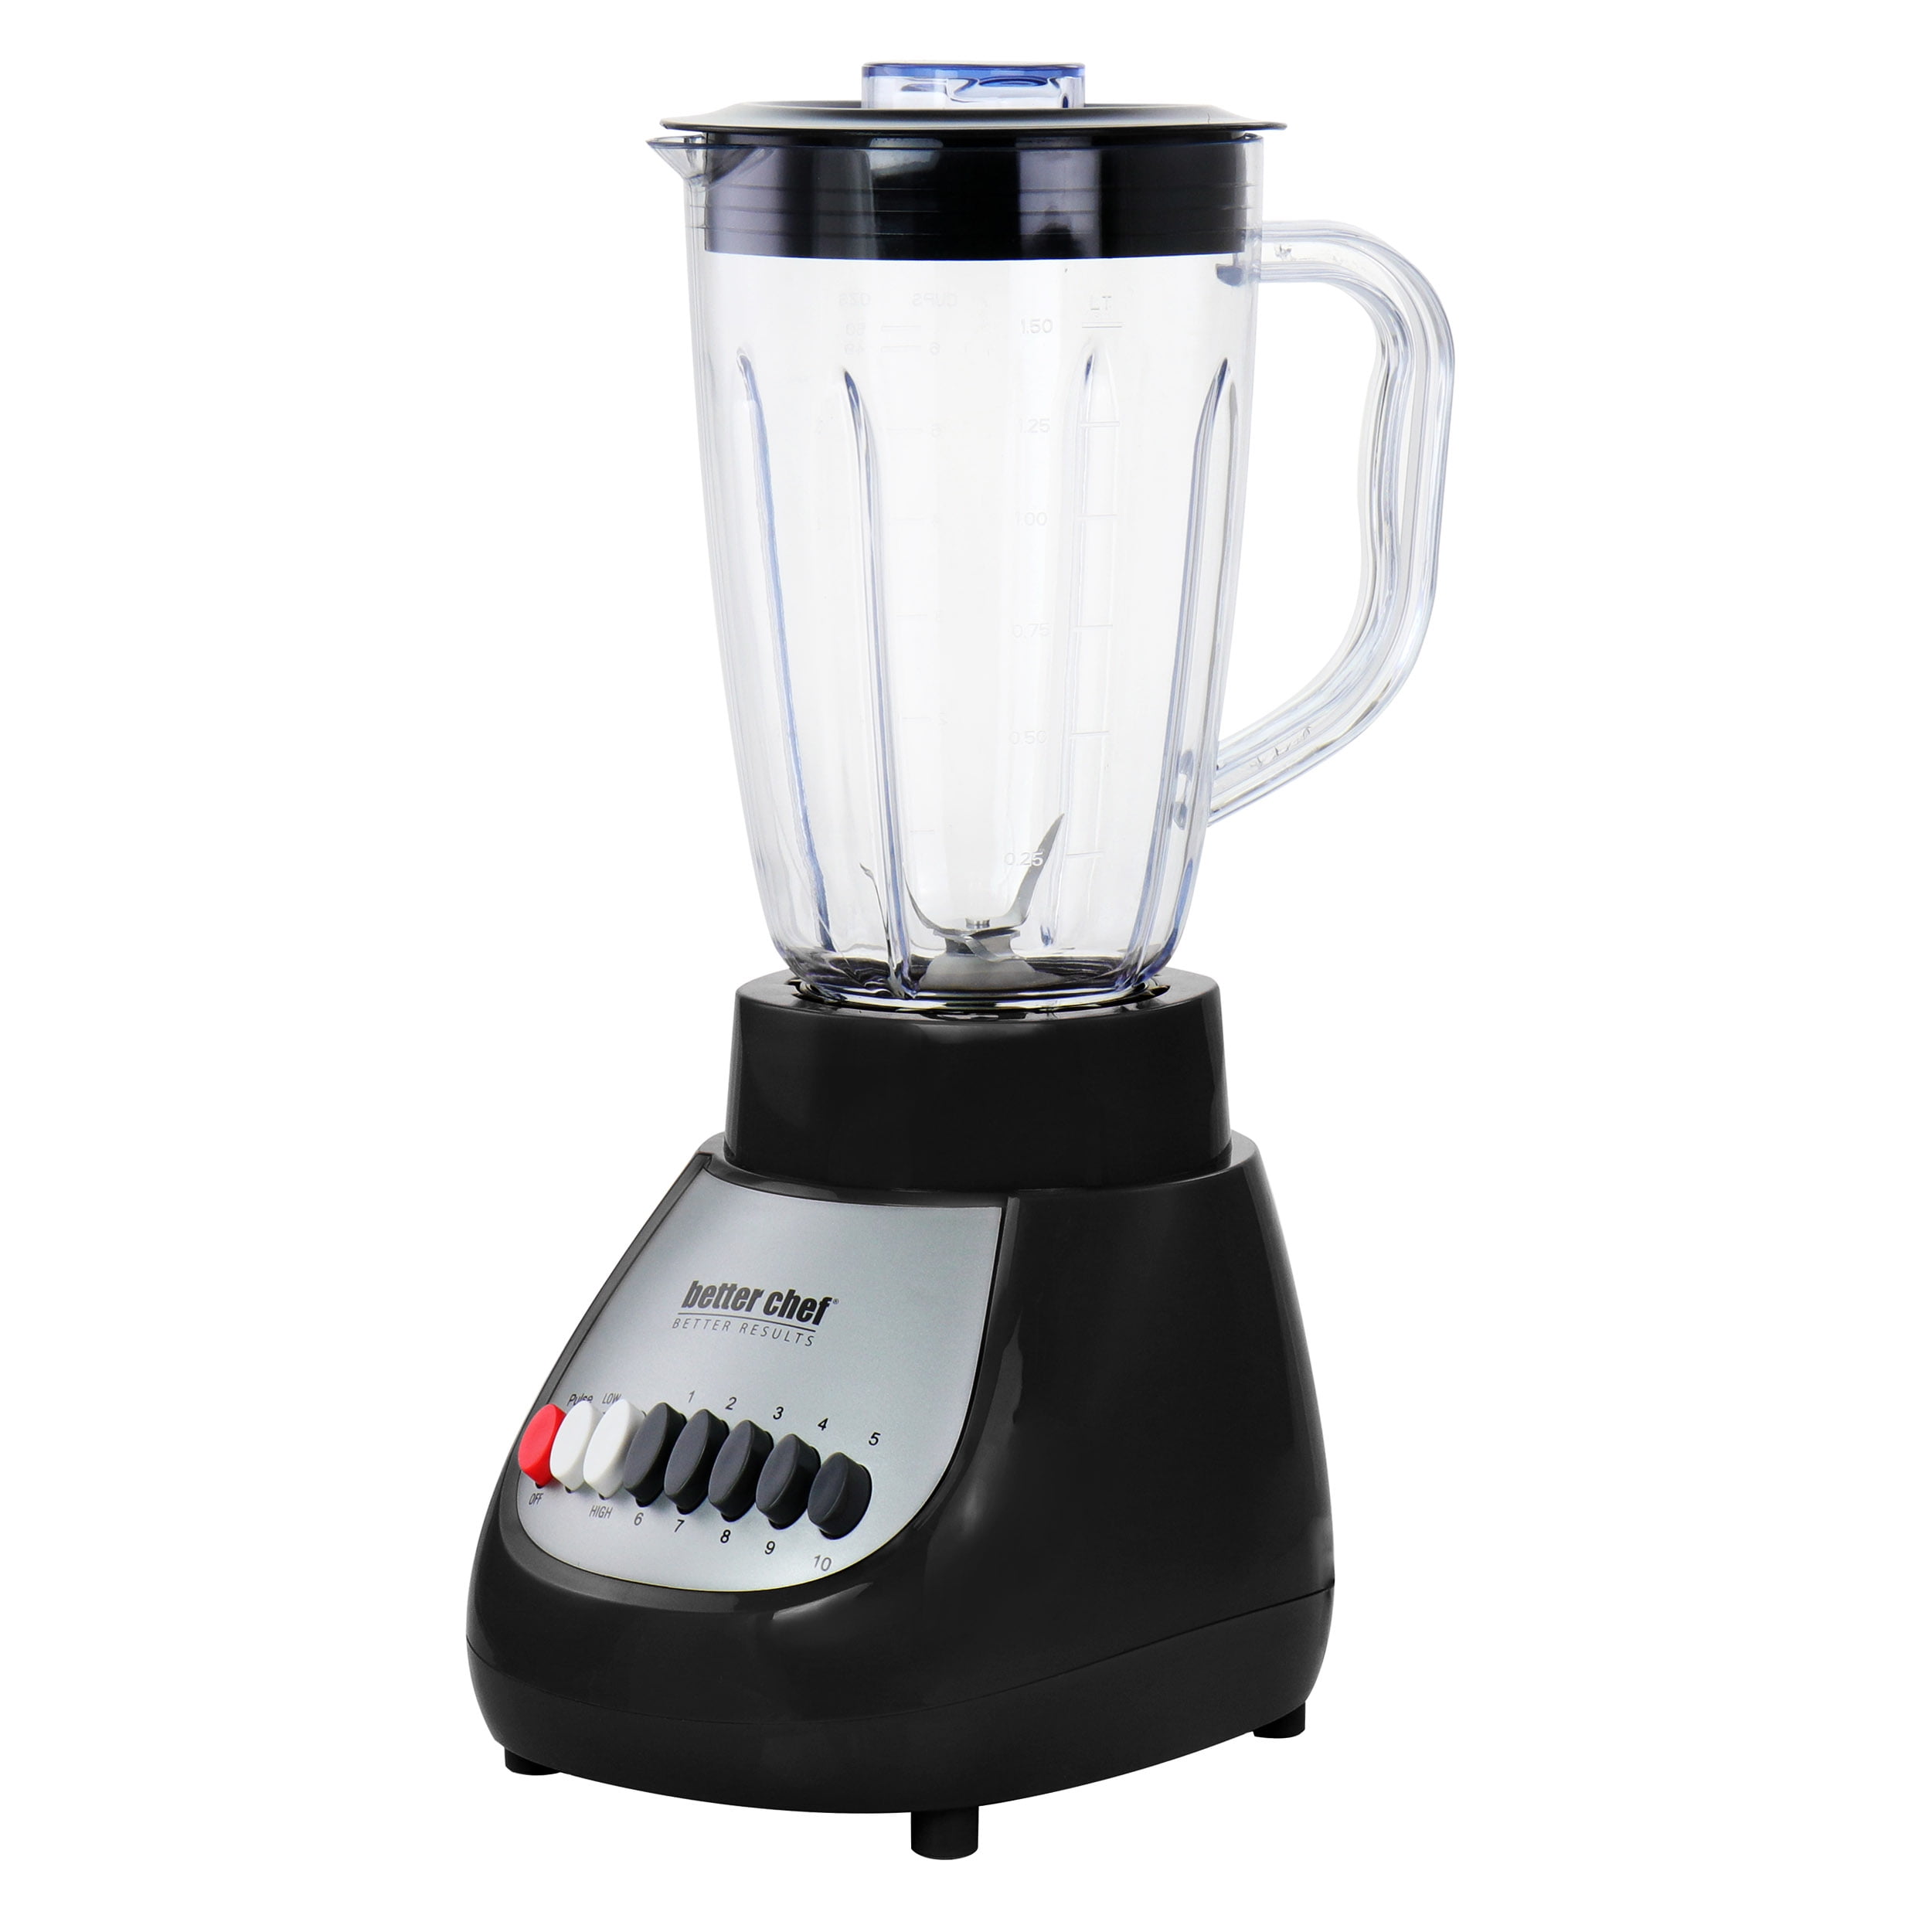 EXPEDITOR™ Commercial 1 Gallon Culinary/Food Blender